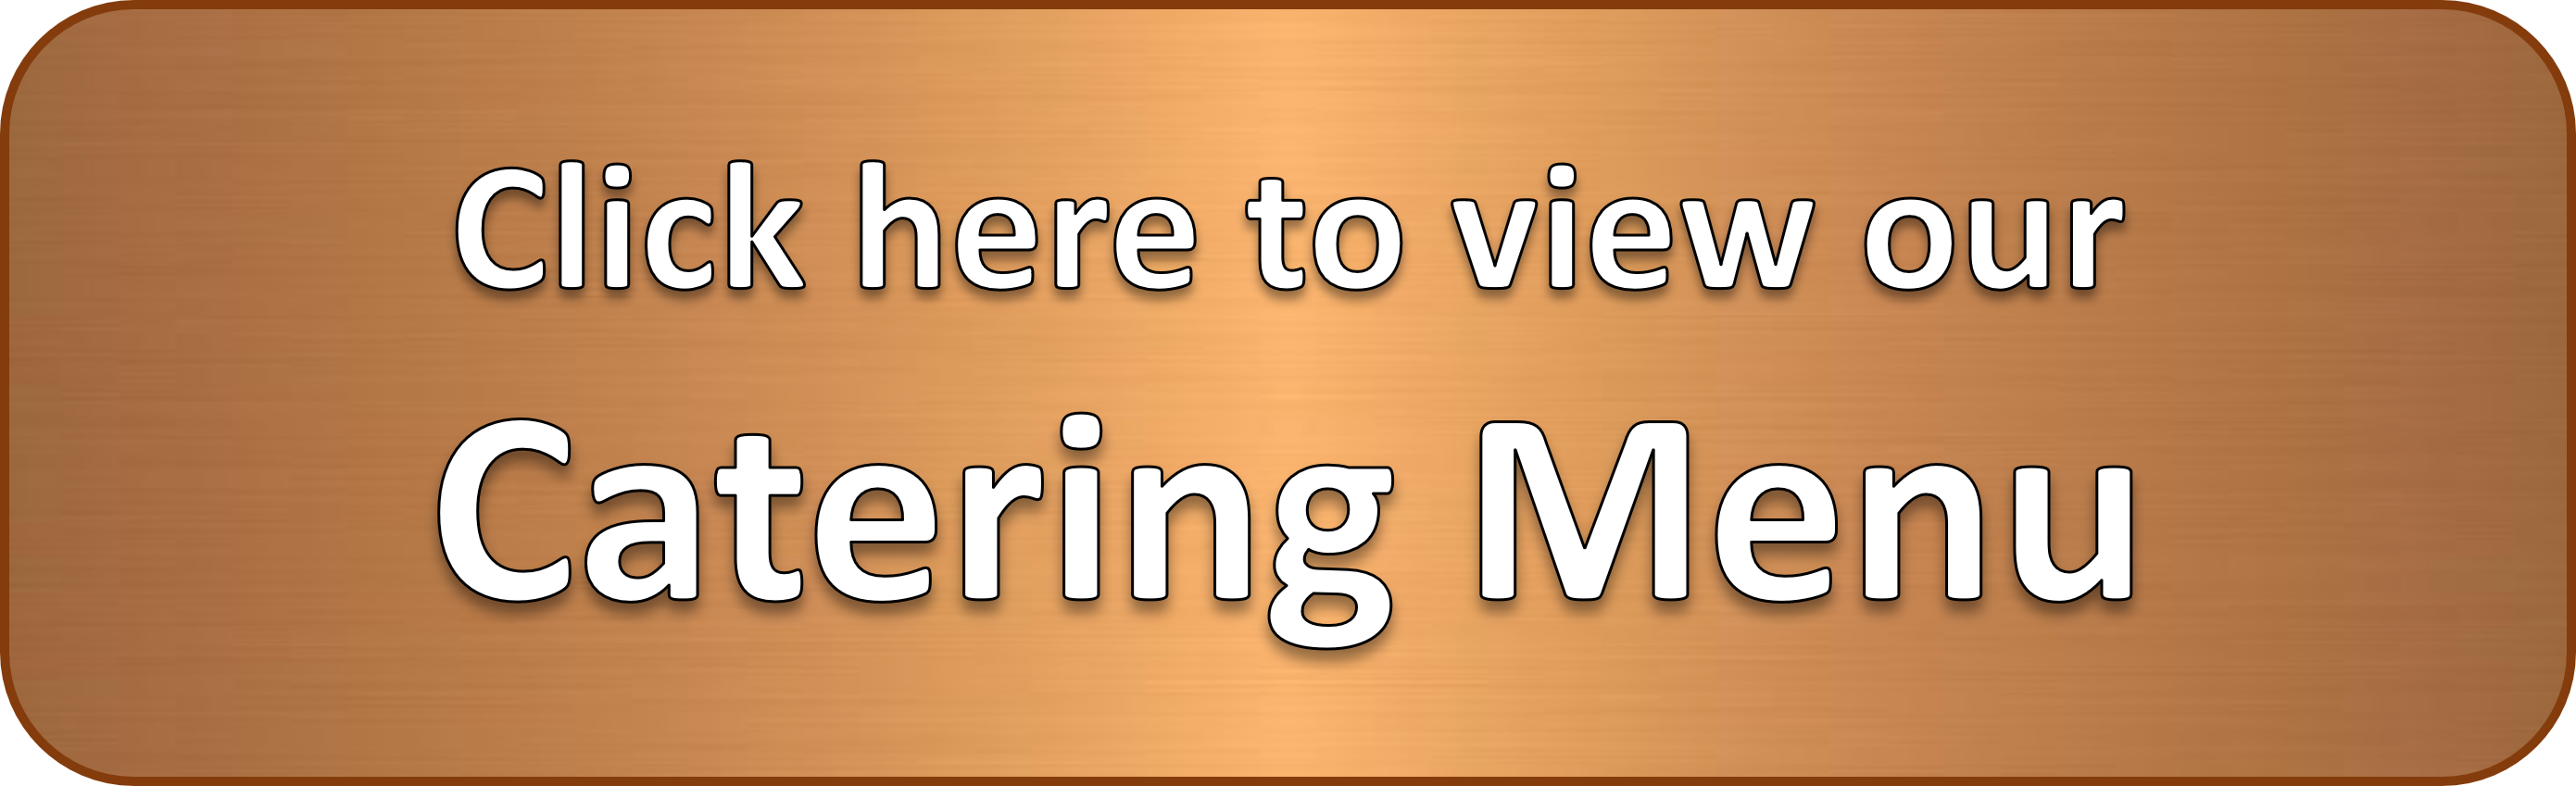 mt view catering menu button